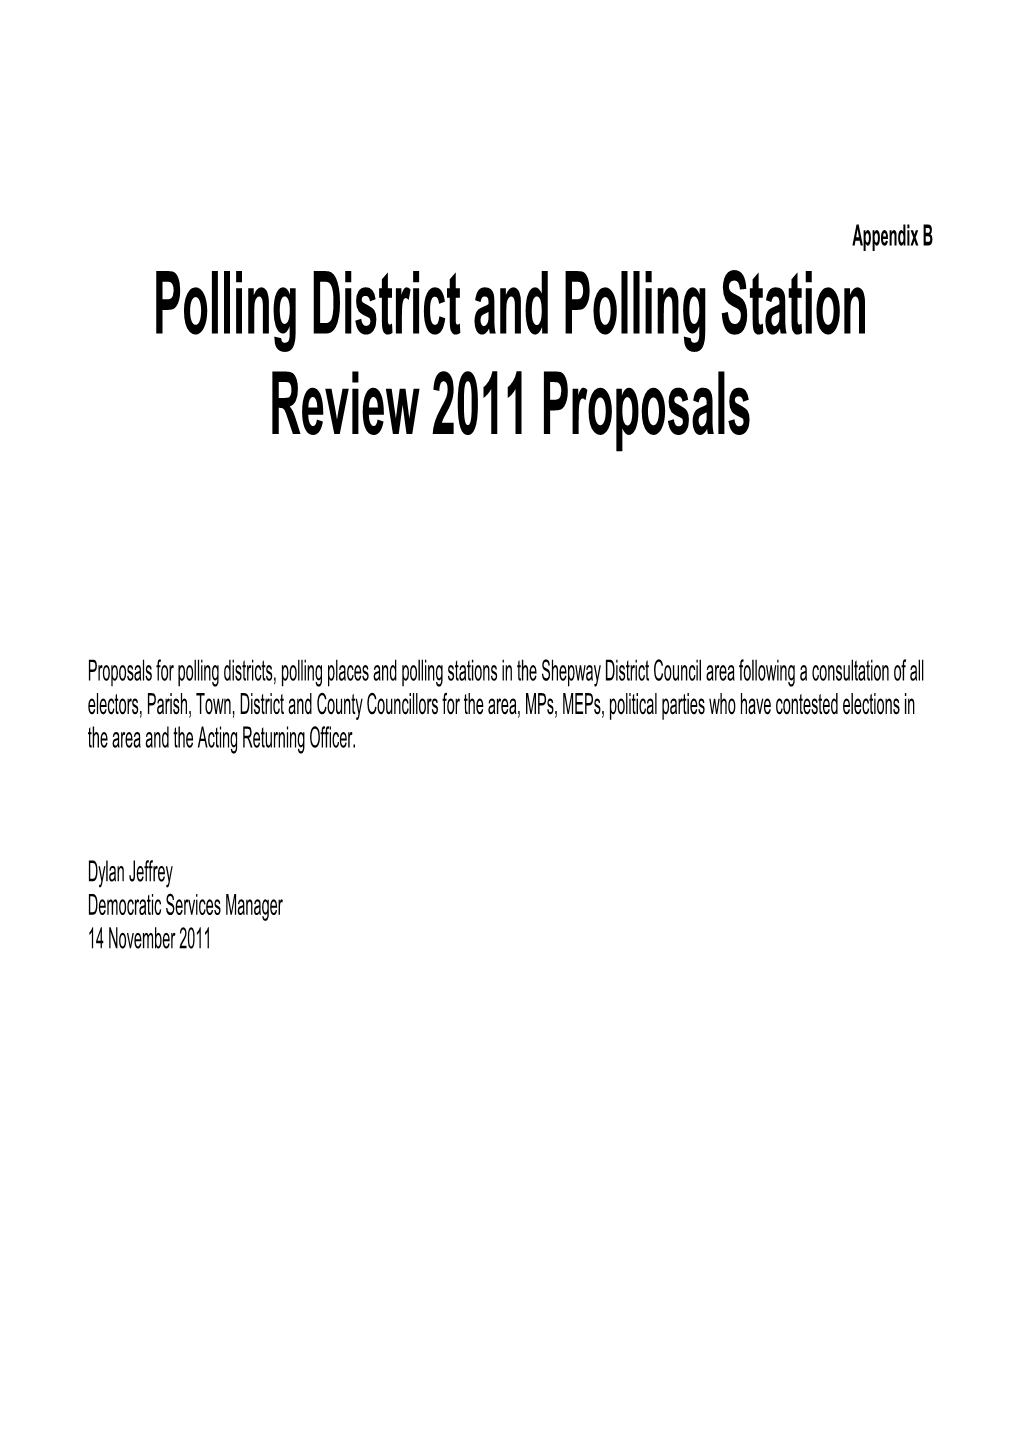 Polling District and Polling Station Review 2011 Proposals